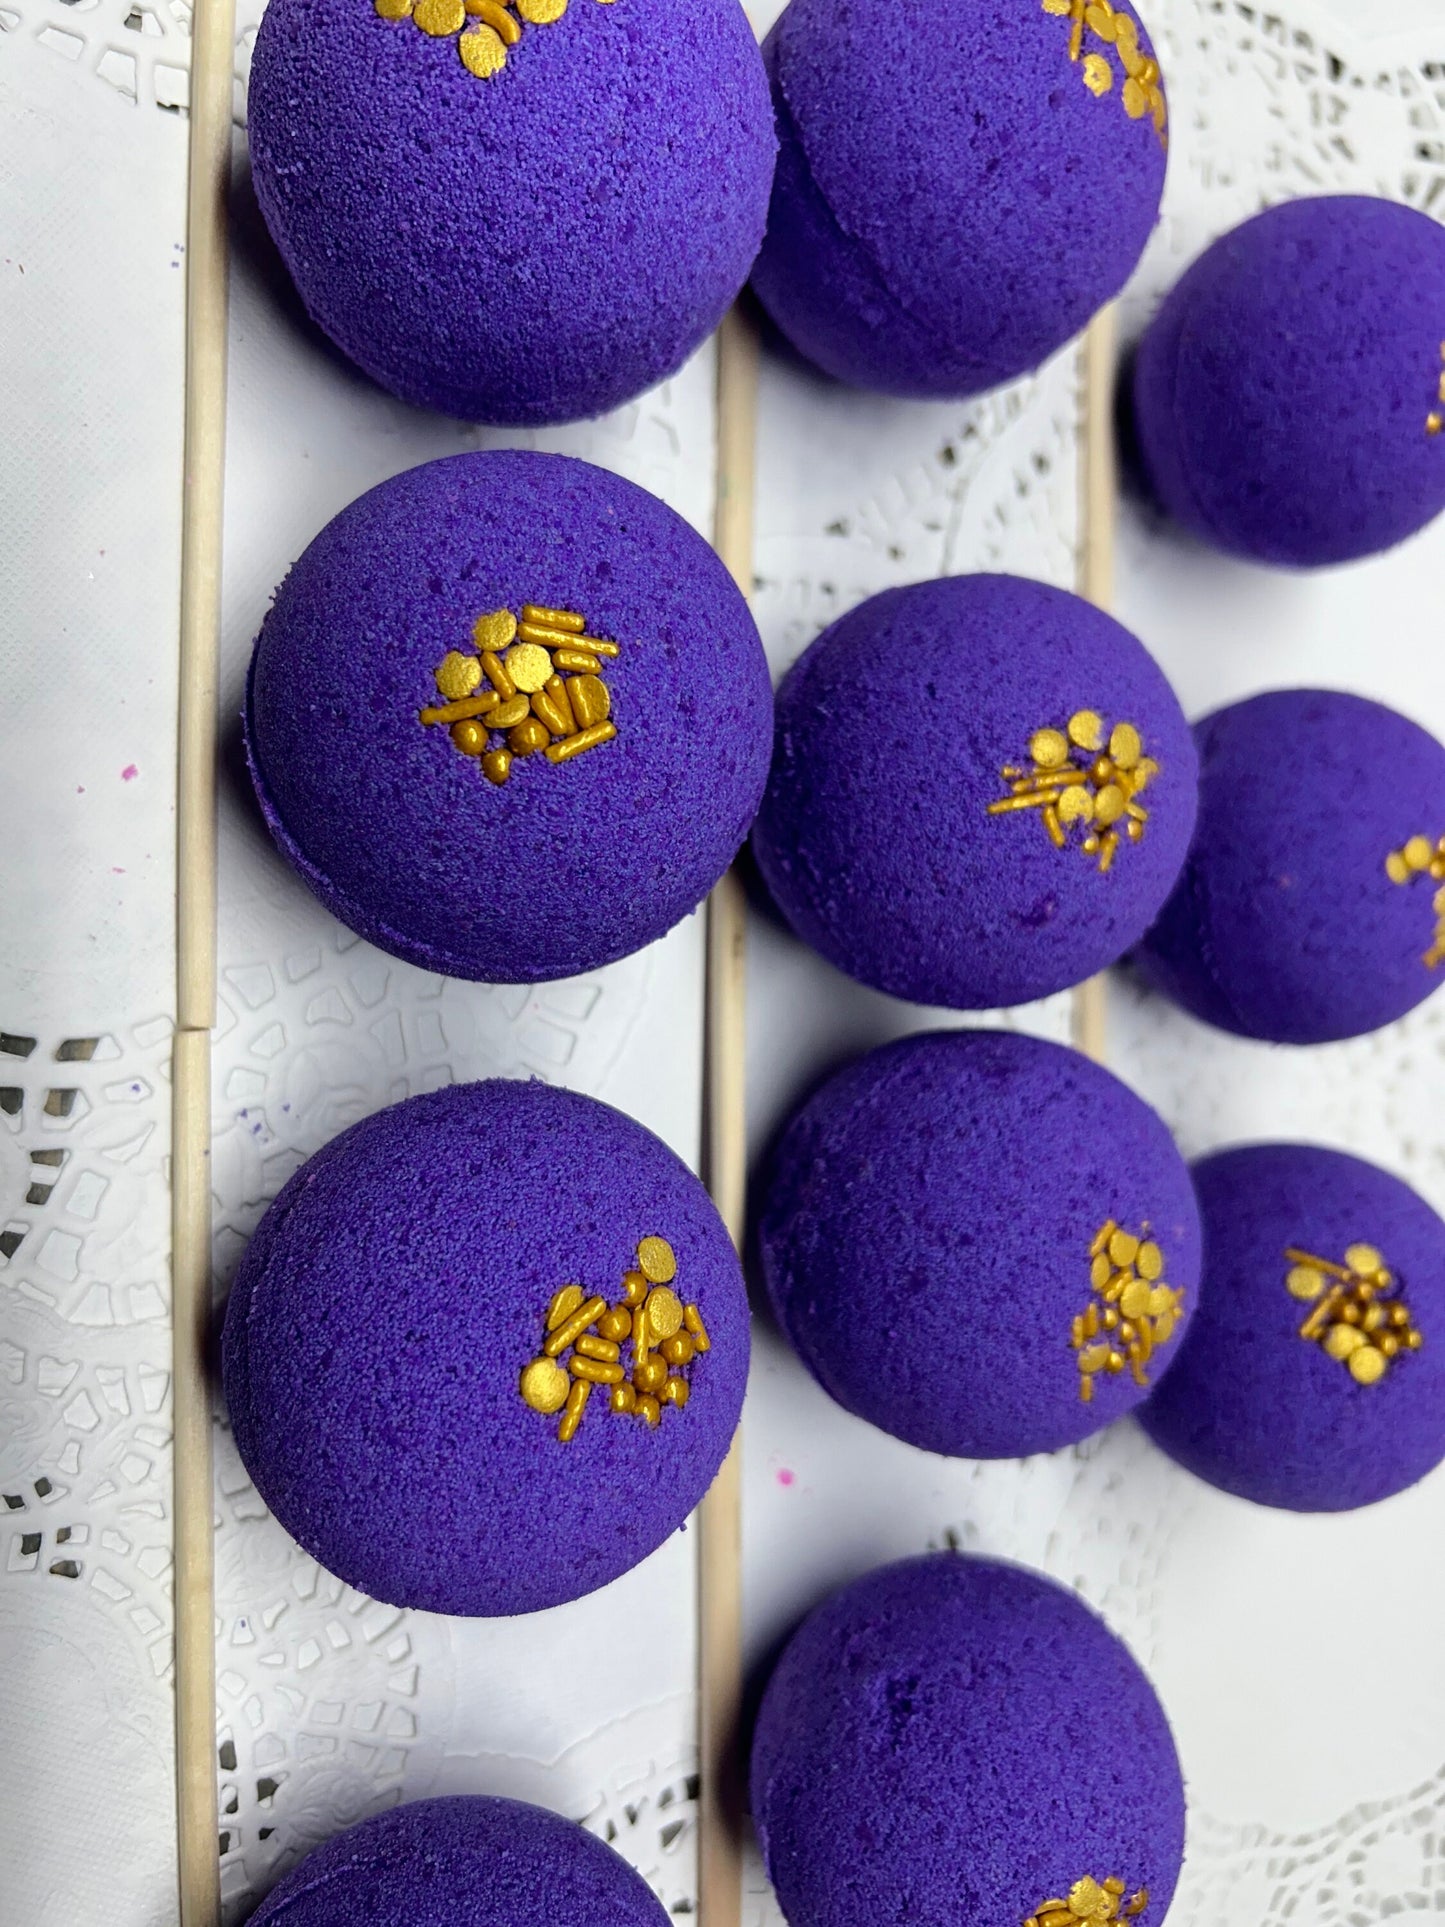 Bath Bomb - Lavender Bath Bombs with Embeds of colors topped with gold sugar sprinkles